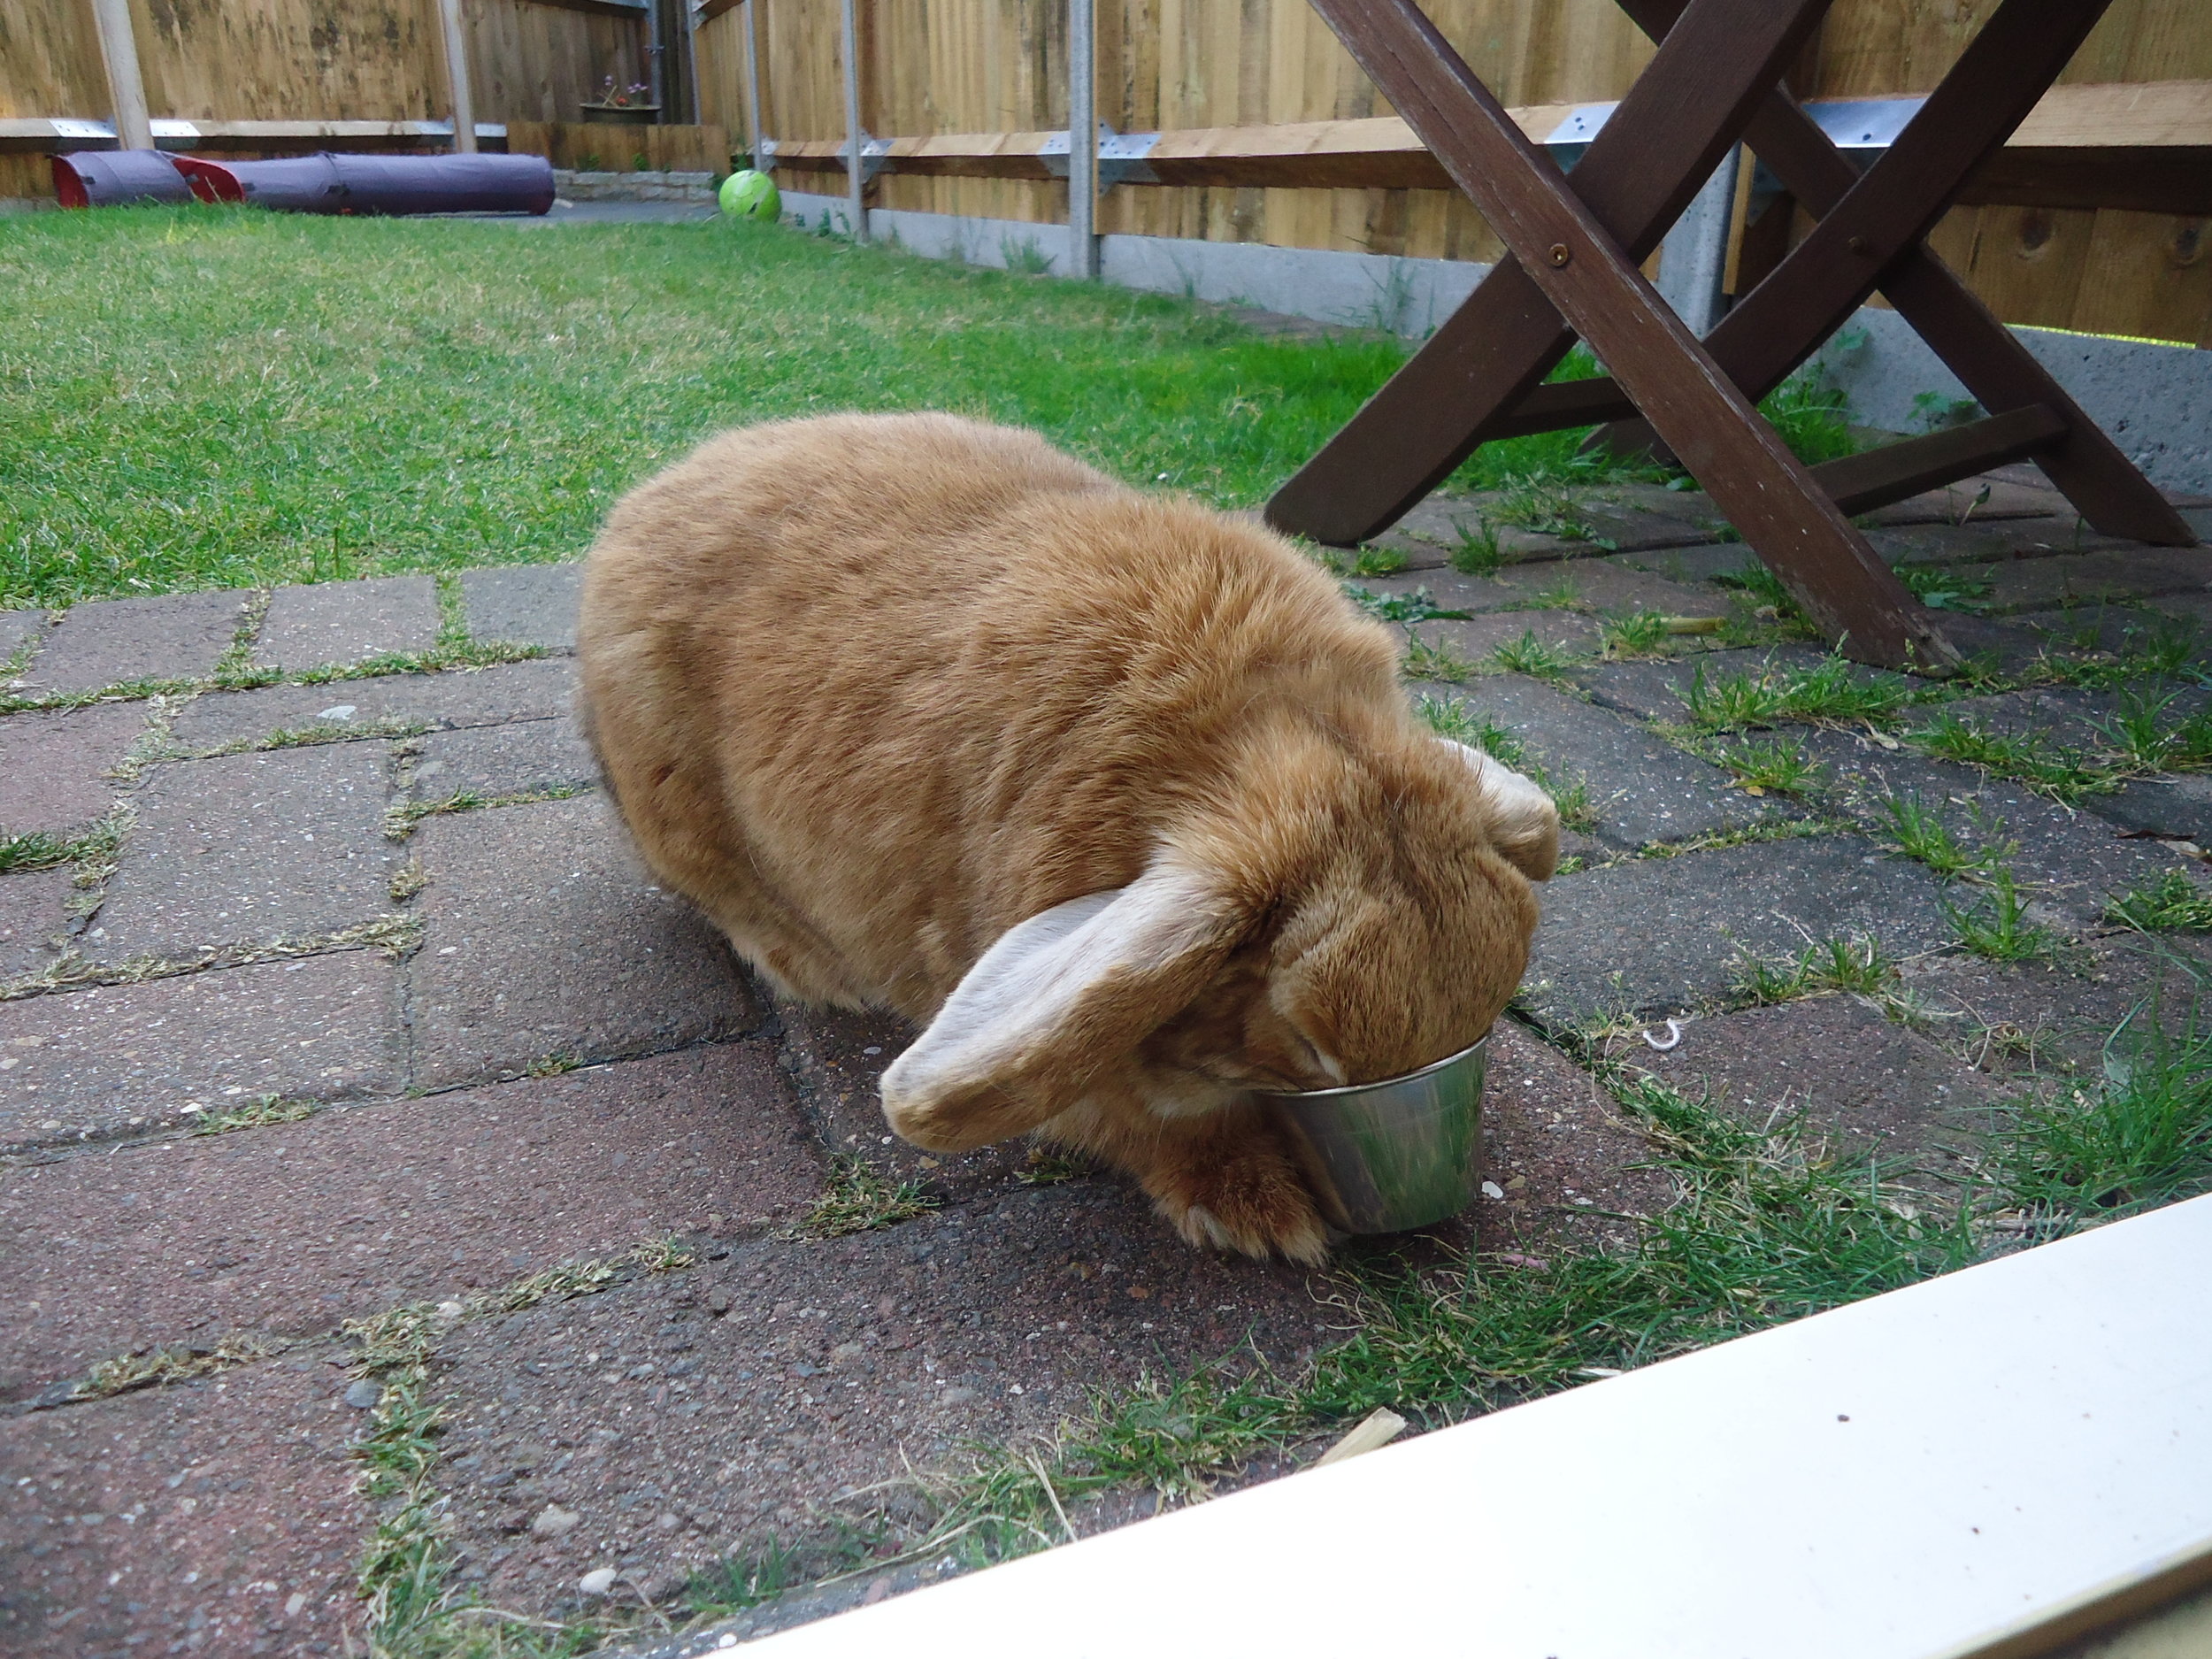 Bunny Is Determined to Get Every Last Bit of Food out of the Bowl